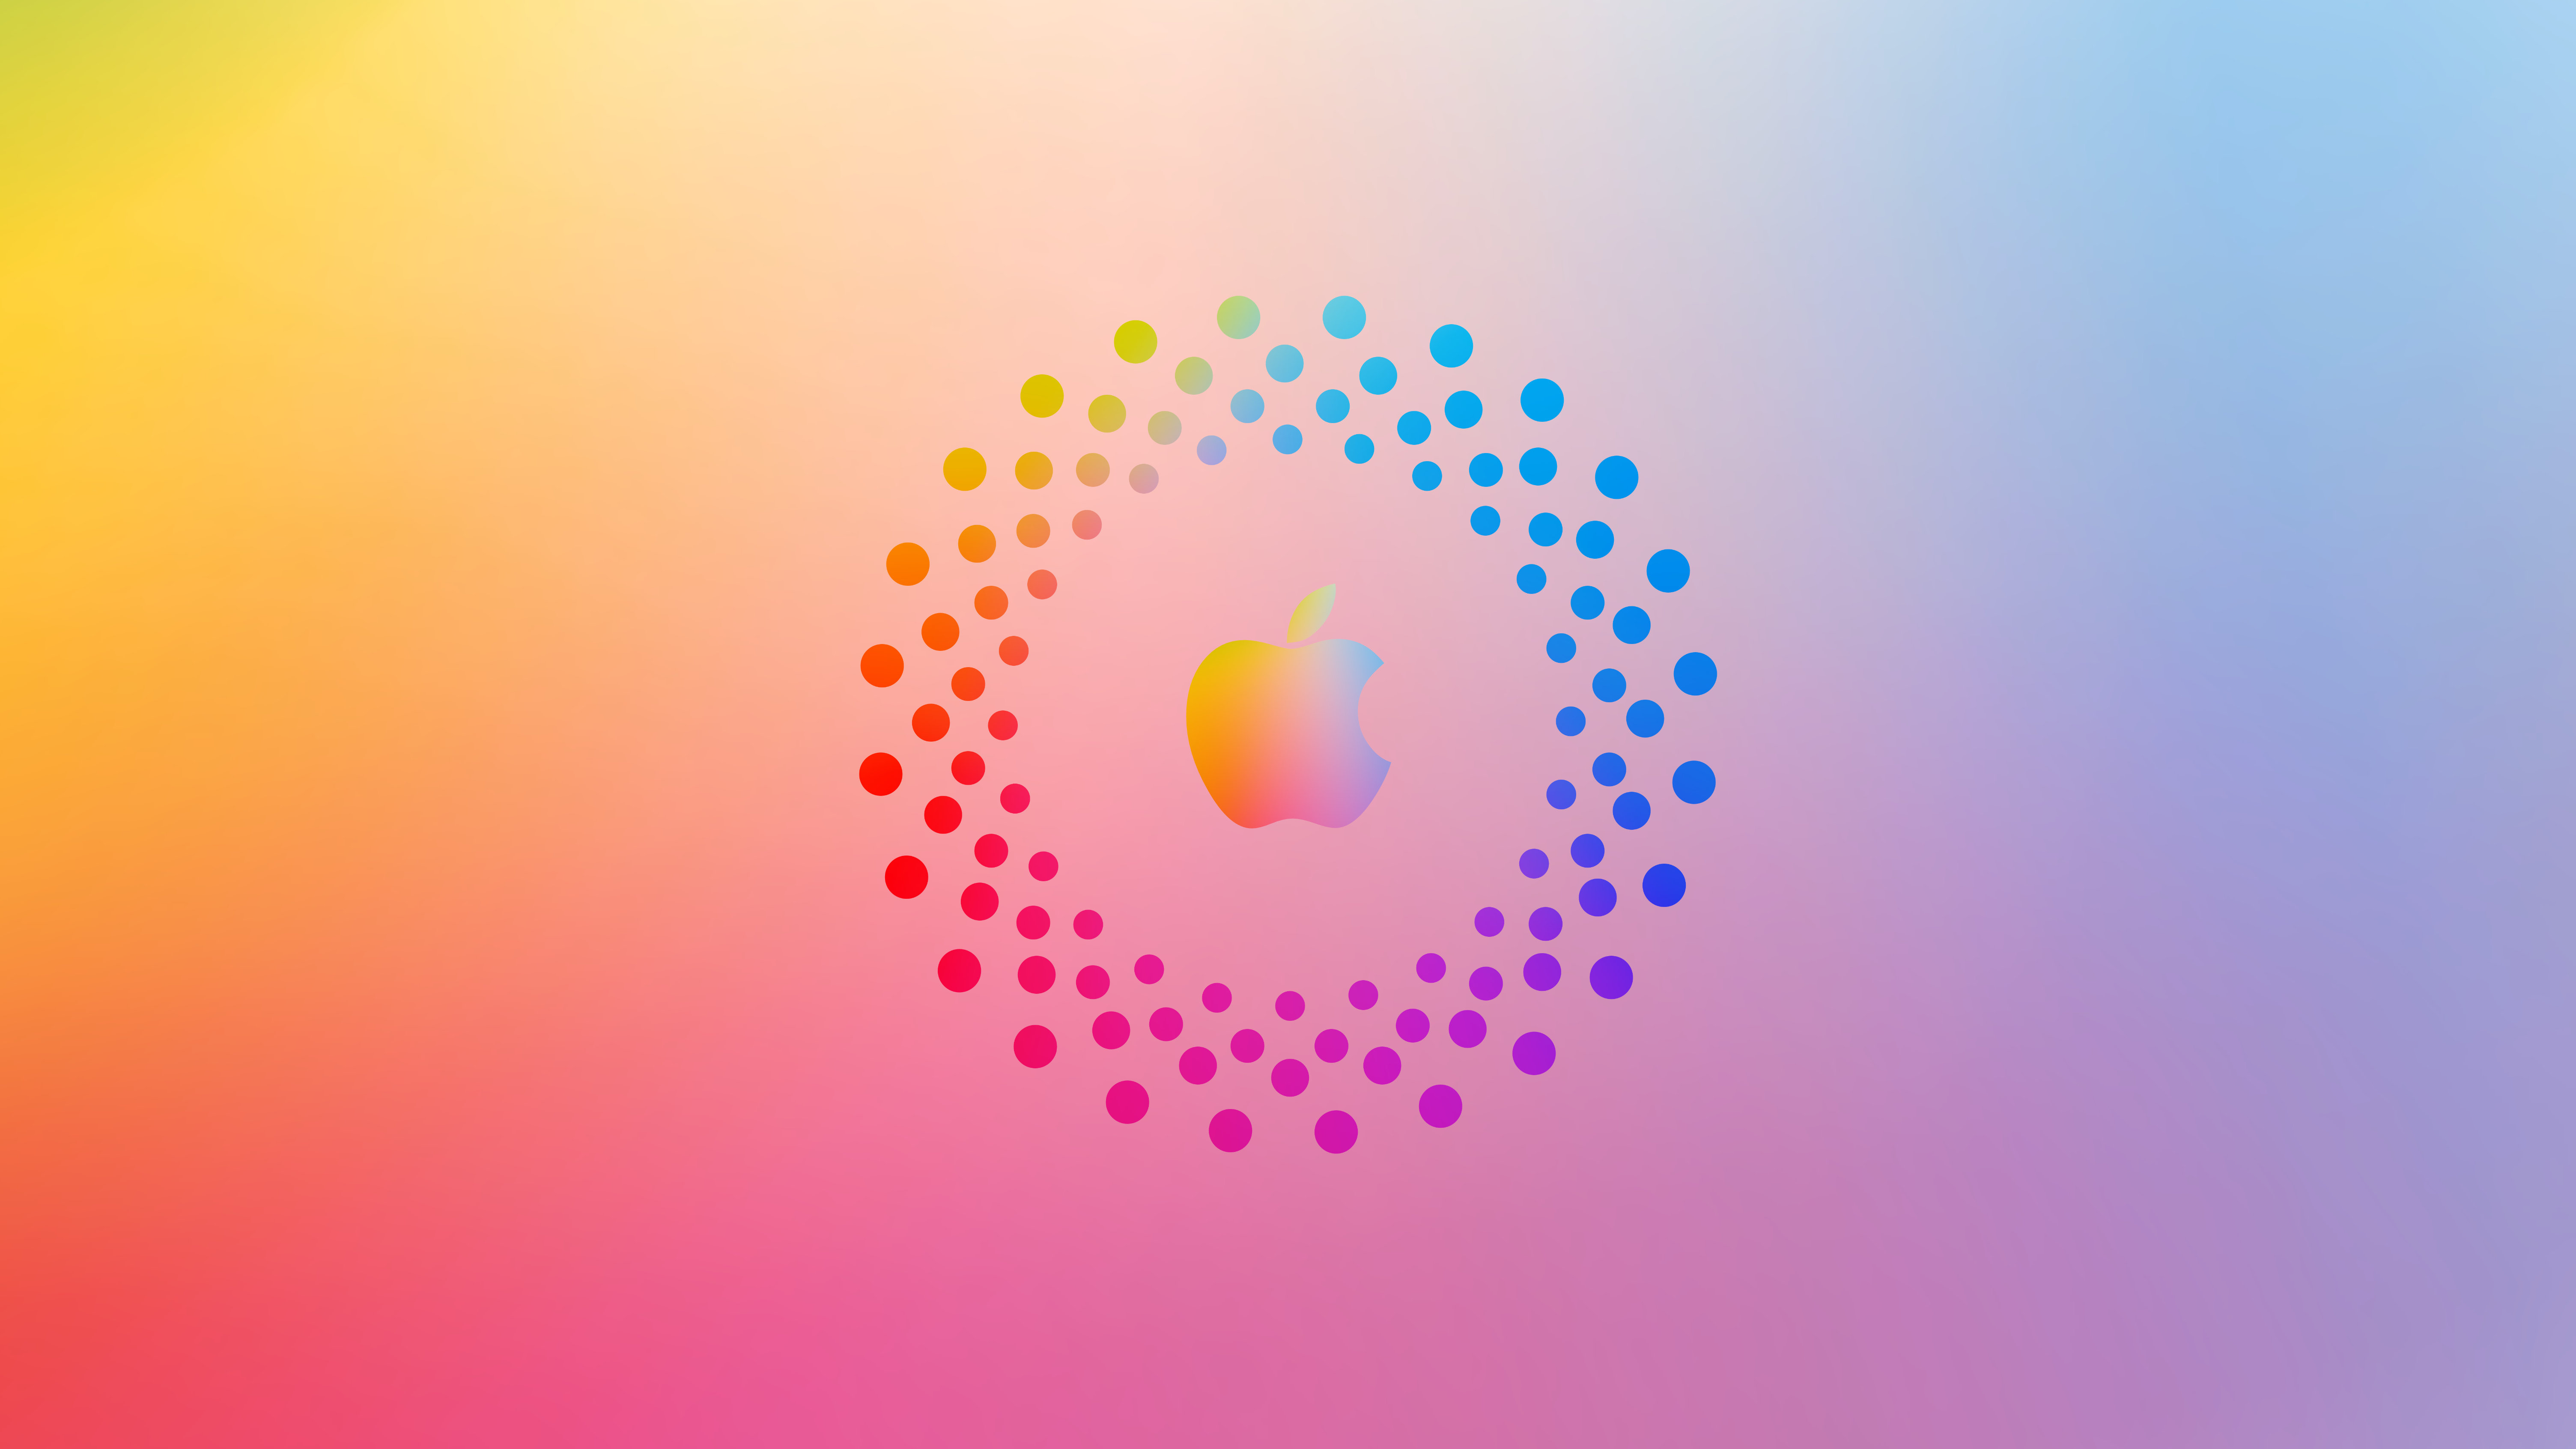 Apple logo Wallpapers and Backgrounds - WallpaperCG